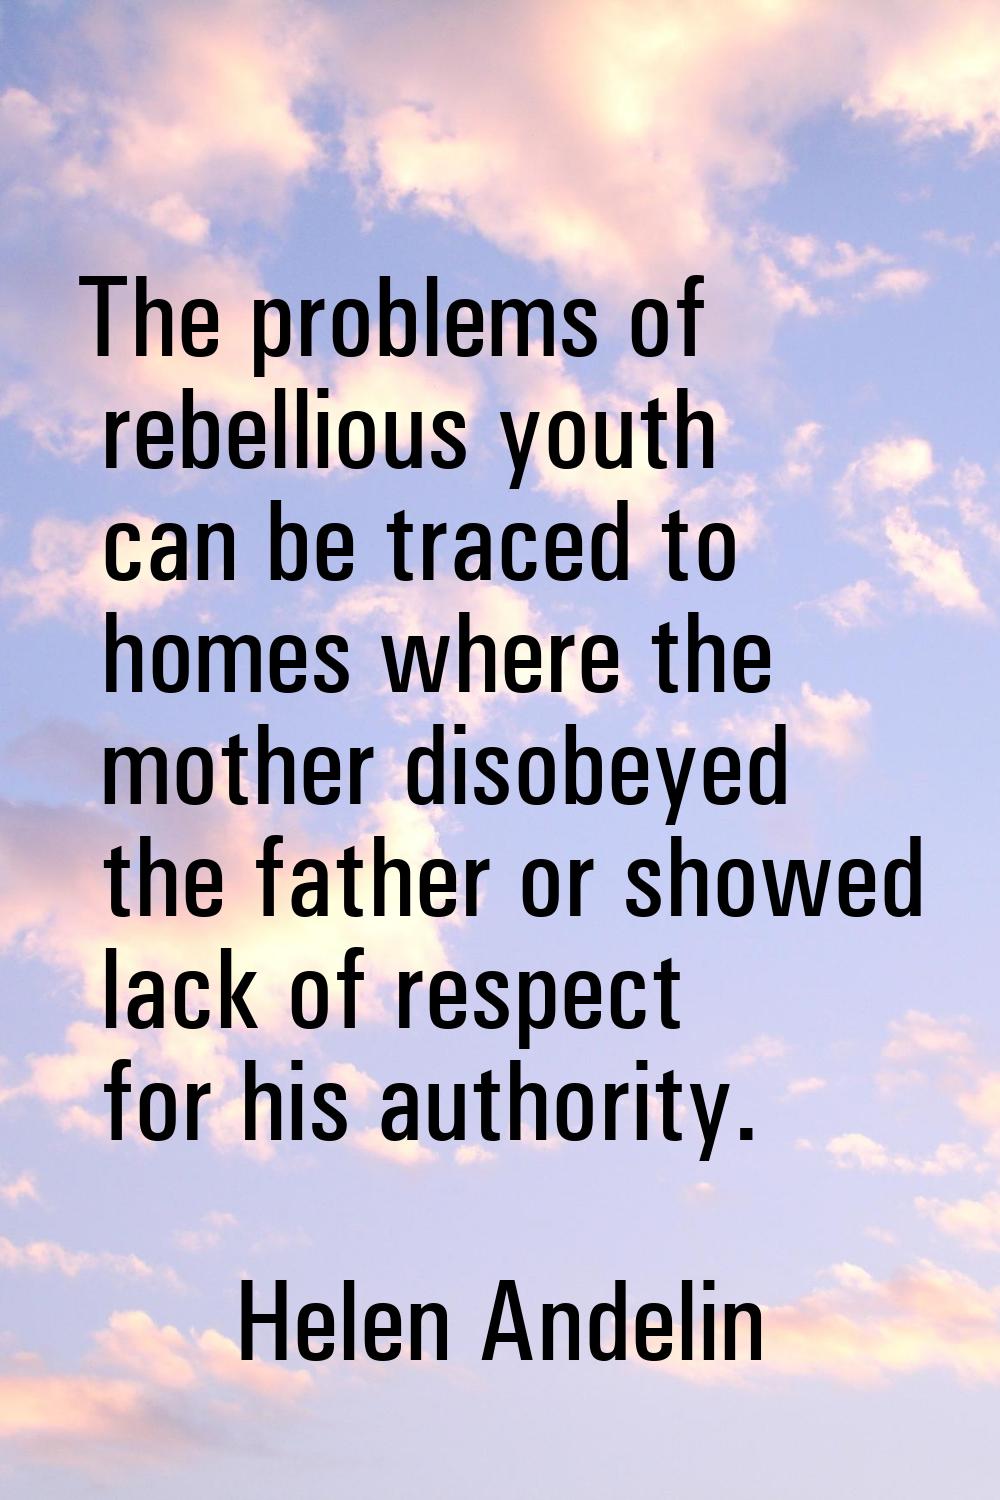 The problems of rebellious youth can be traced to homes where the mother disobeyed the father or sh